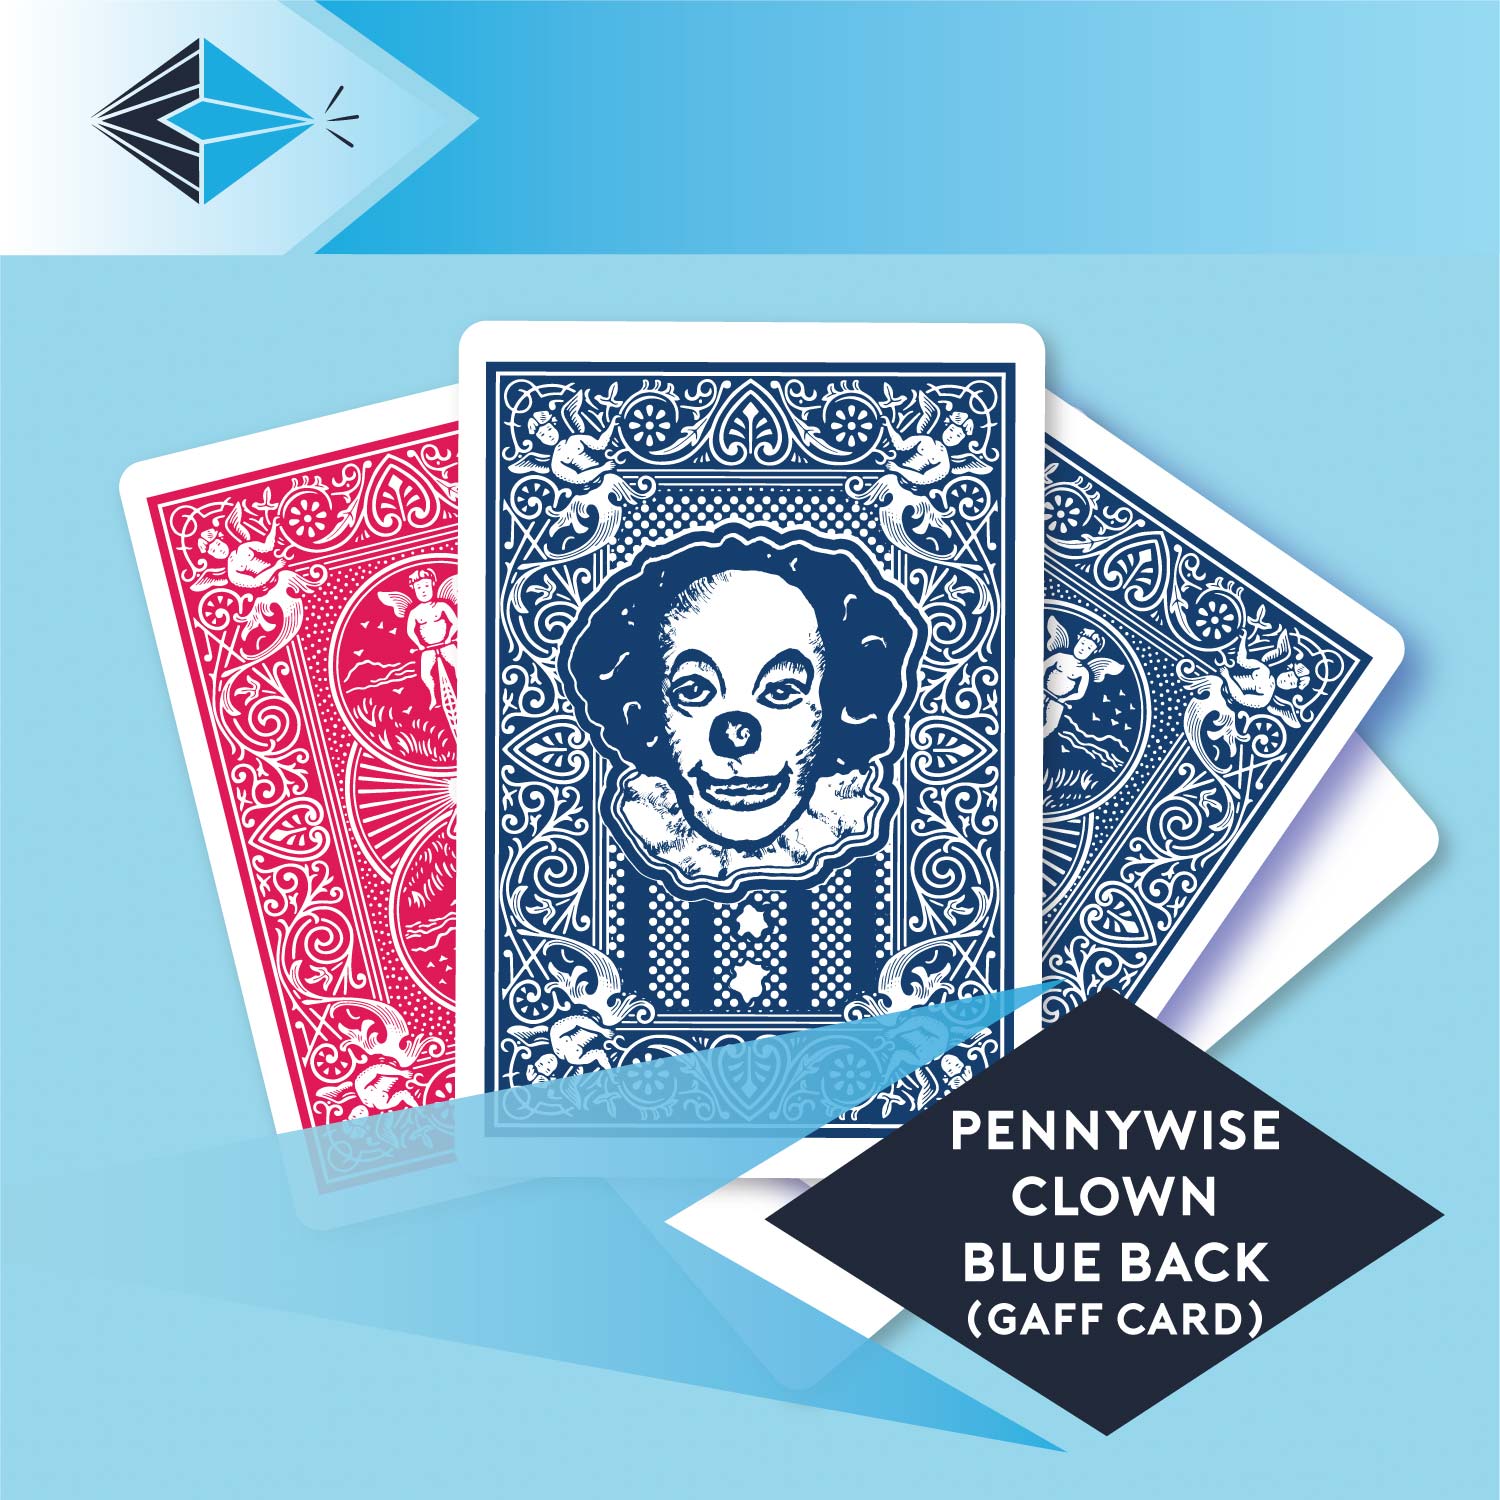 pennywise clown blue back gaff card 217 playing card for magicians printing printers Stockport Manchester UK